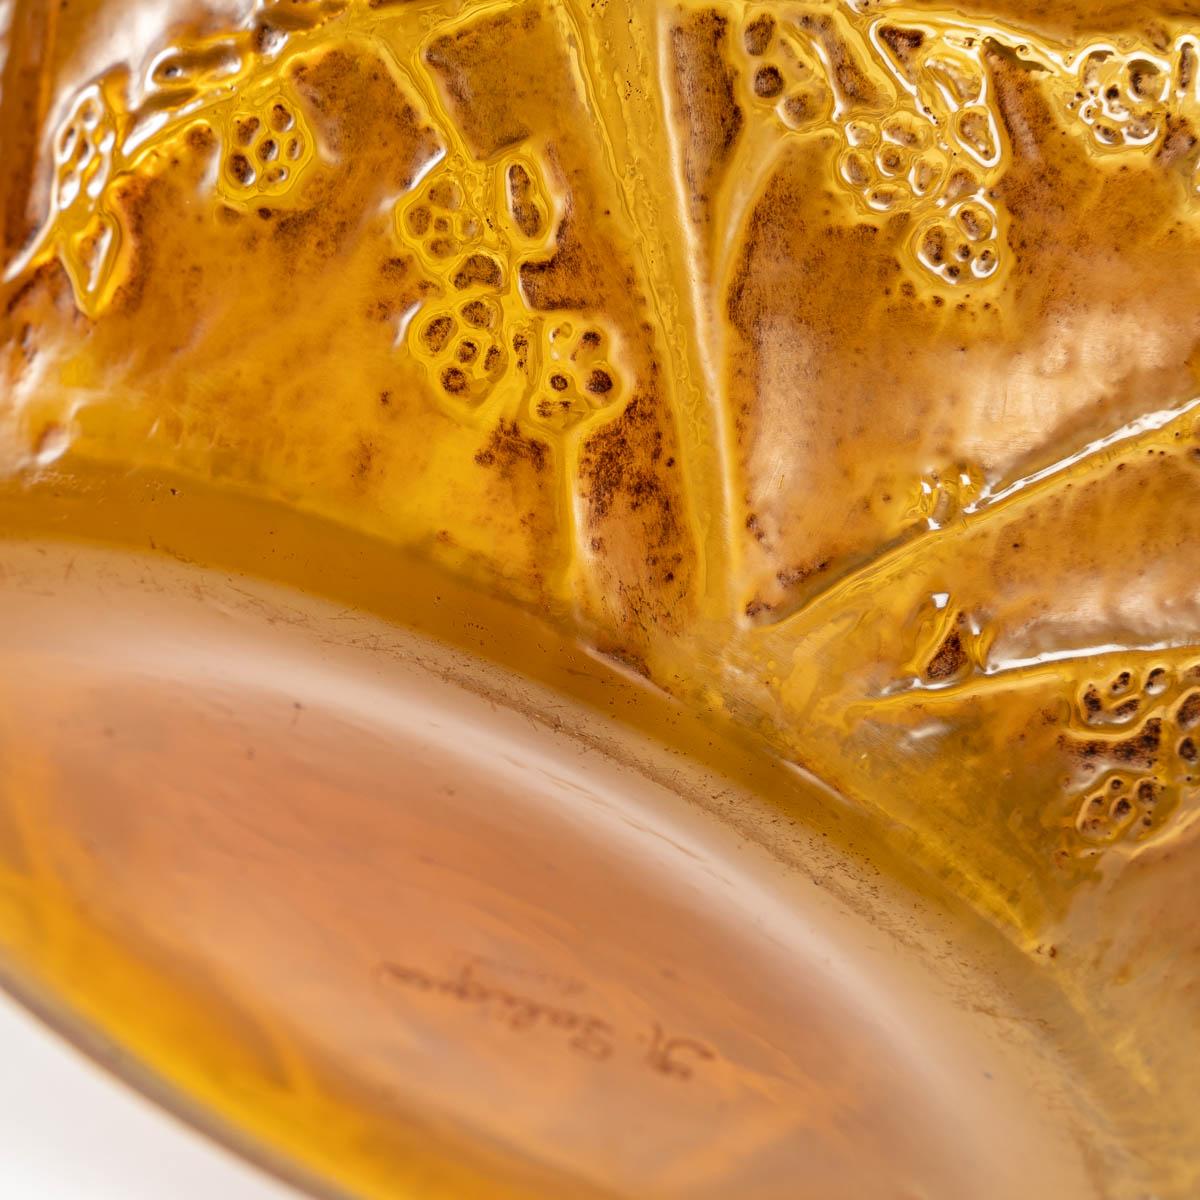 Early 20th Century 1919 Rene Lalique Perruches Vase Cased Butterscotch Glass with Sepia Patina